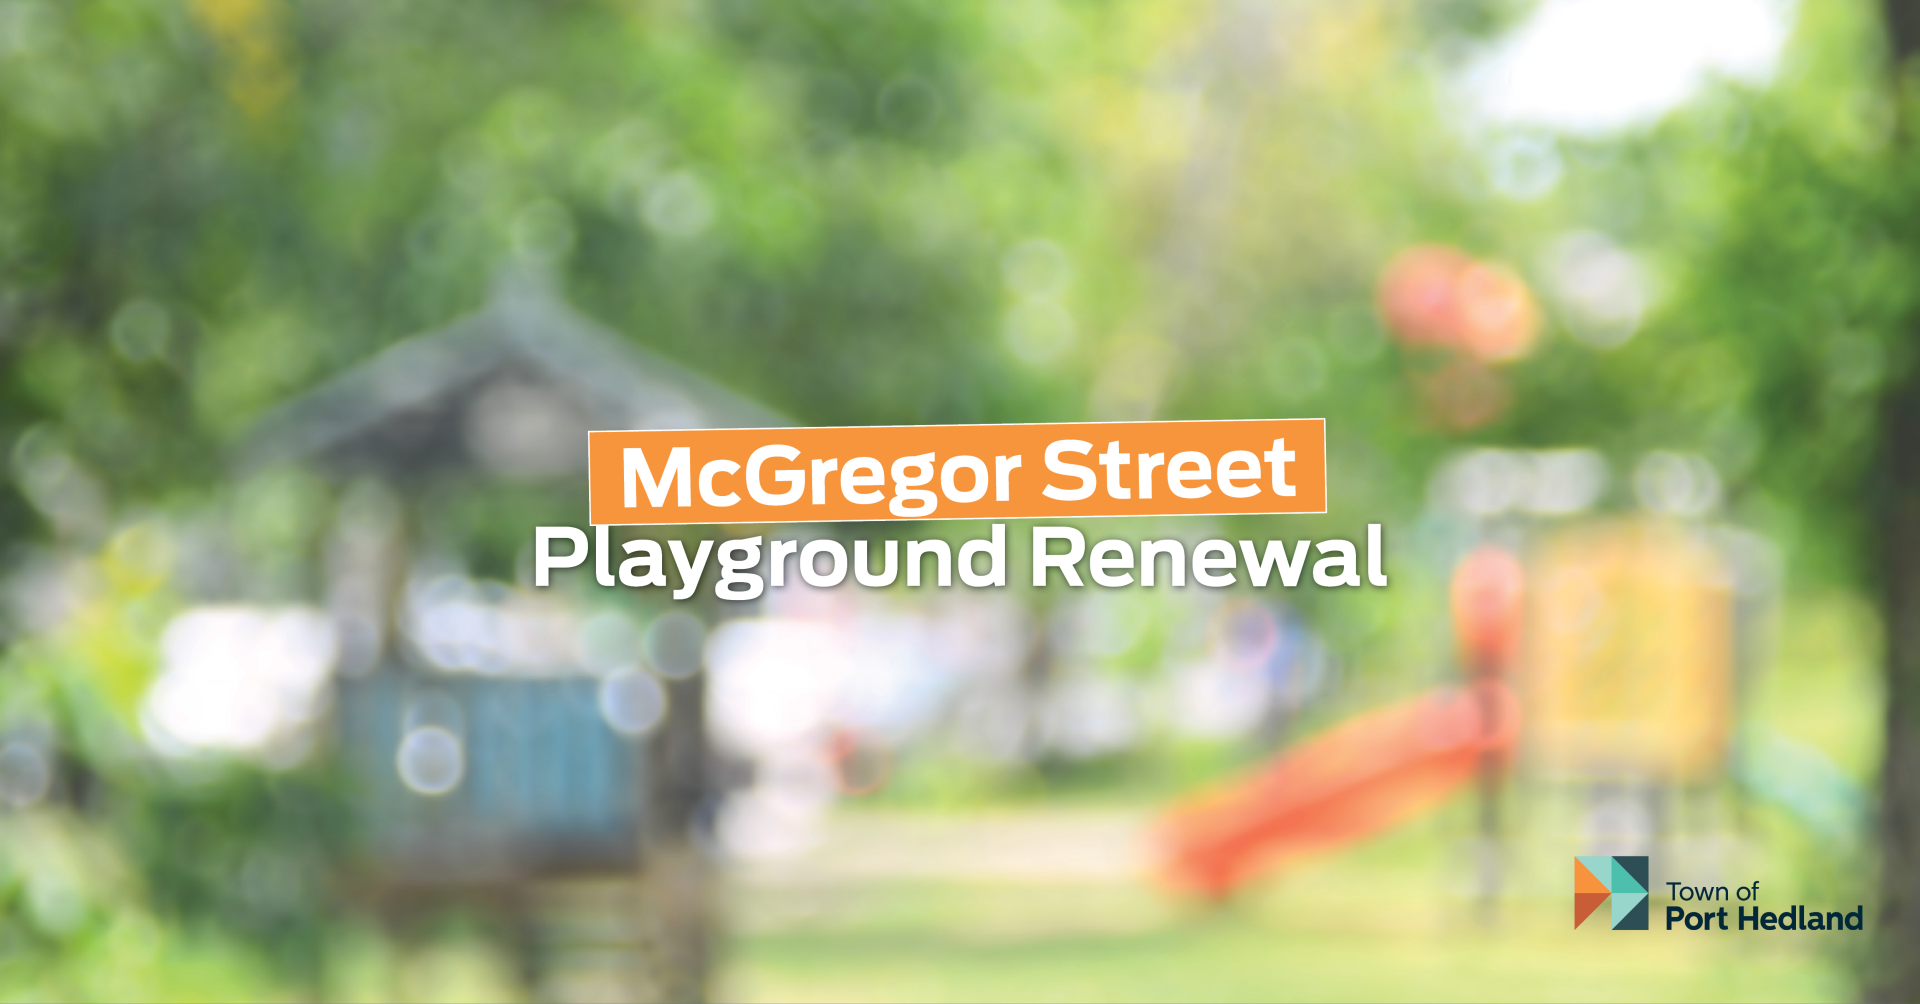 Replacement of the McGregor Street playground